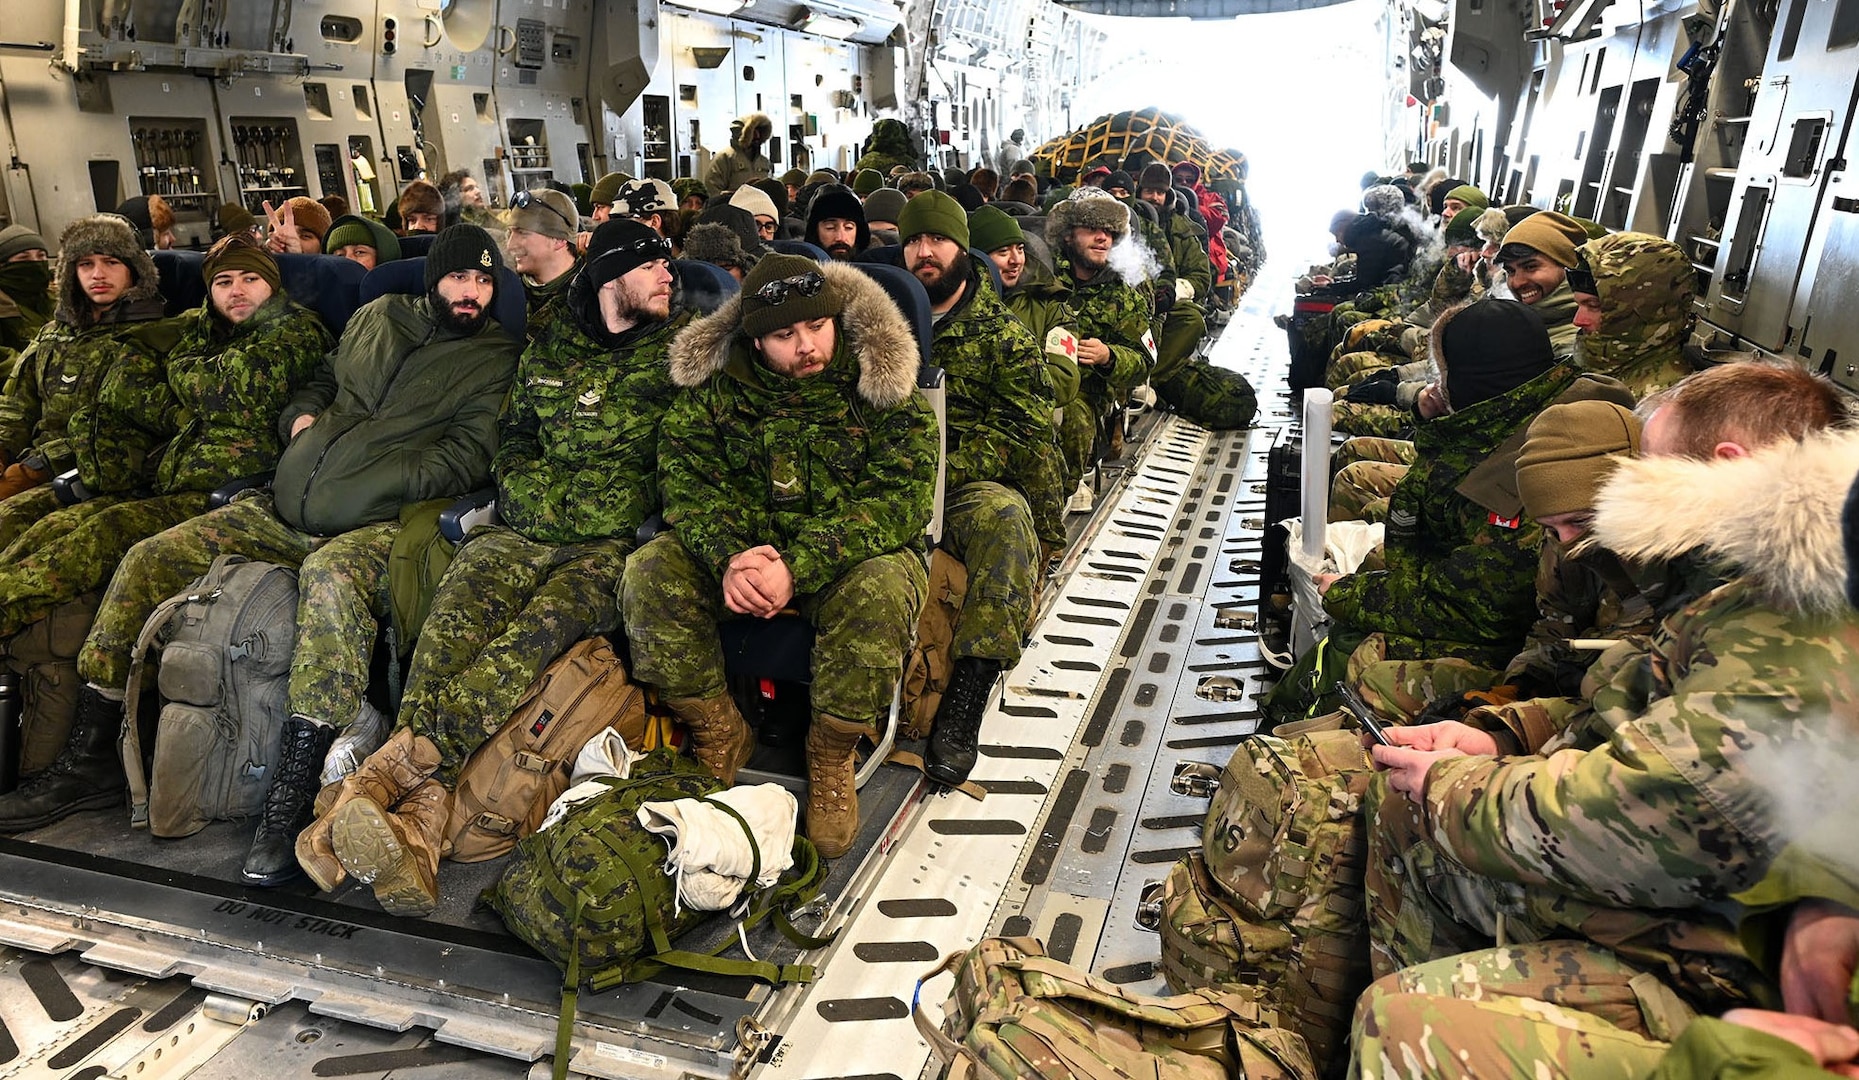 Canadian Army reserve and American National Guard Soldiers wait for takeoff in Resolute Bay, Nunavut, onboard a C-17 Globemaster III flown by the New York Air National Guard's 105th Airlift Wing March 18, 2023, during Exercise Guerrier Nordique. The Soldiers were briefed by two intelligence Airmen assigned to the New York Air Guard's 109th Airlift Wing before heading north to the Arctic.